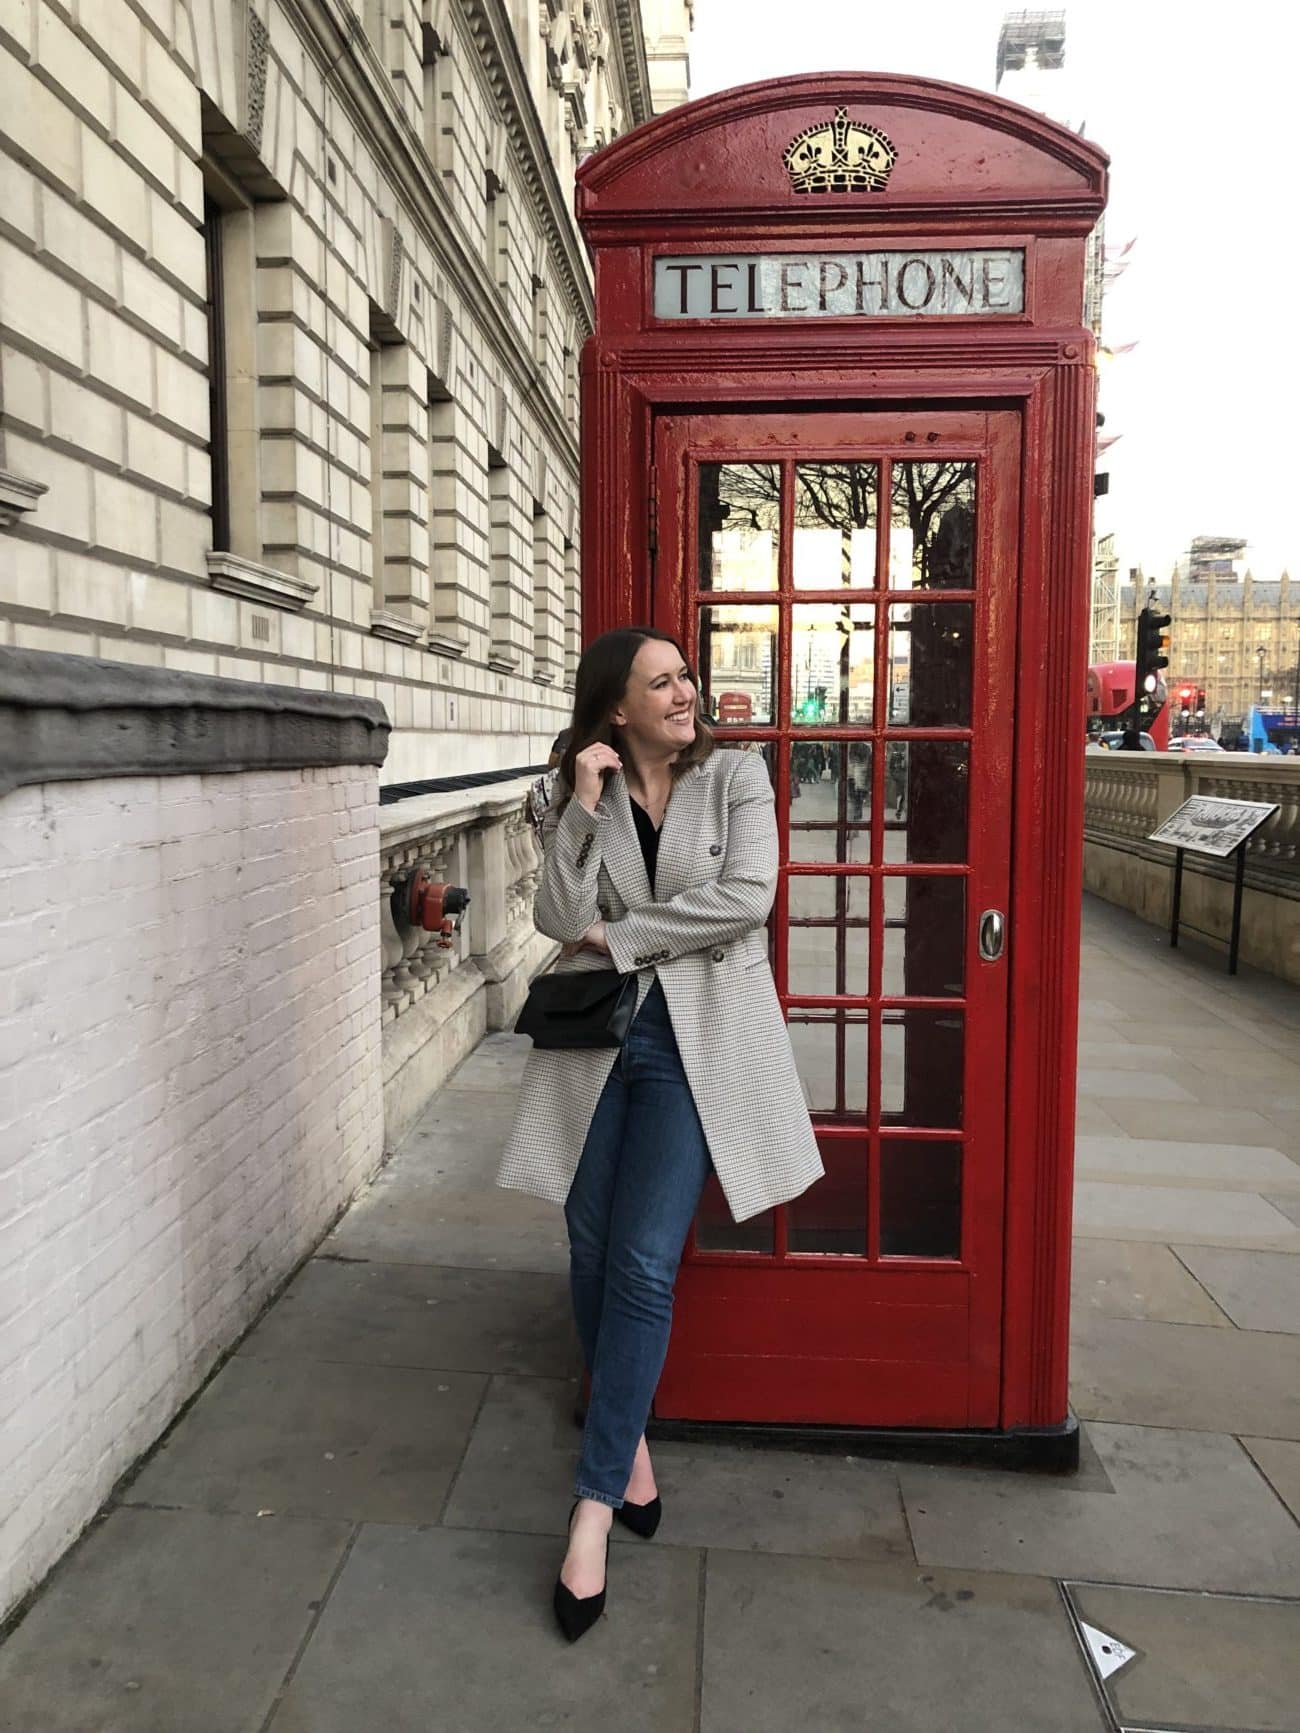 The Most Instagram-Worthy Spots in London I RED PHONE BOOTHS